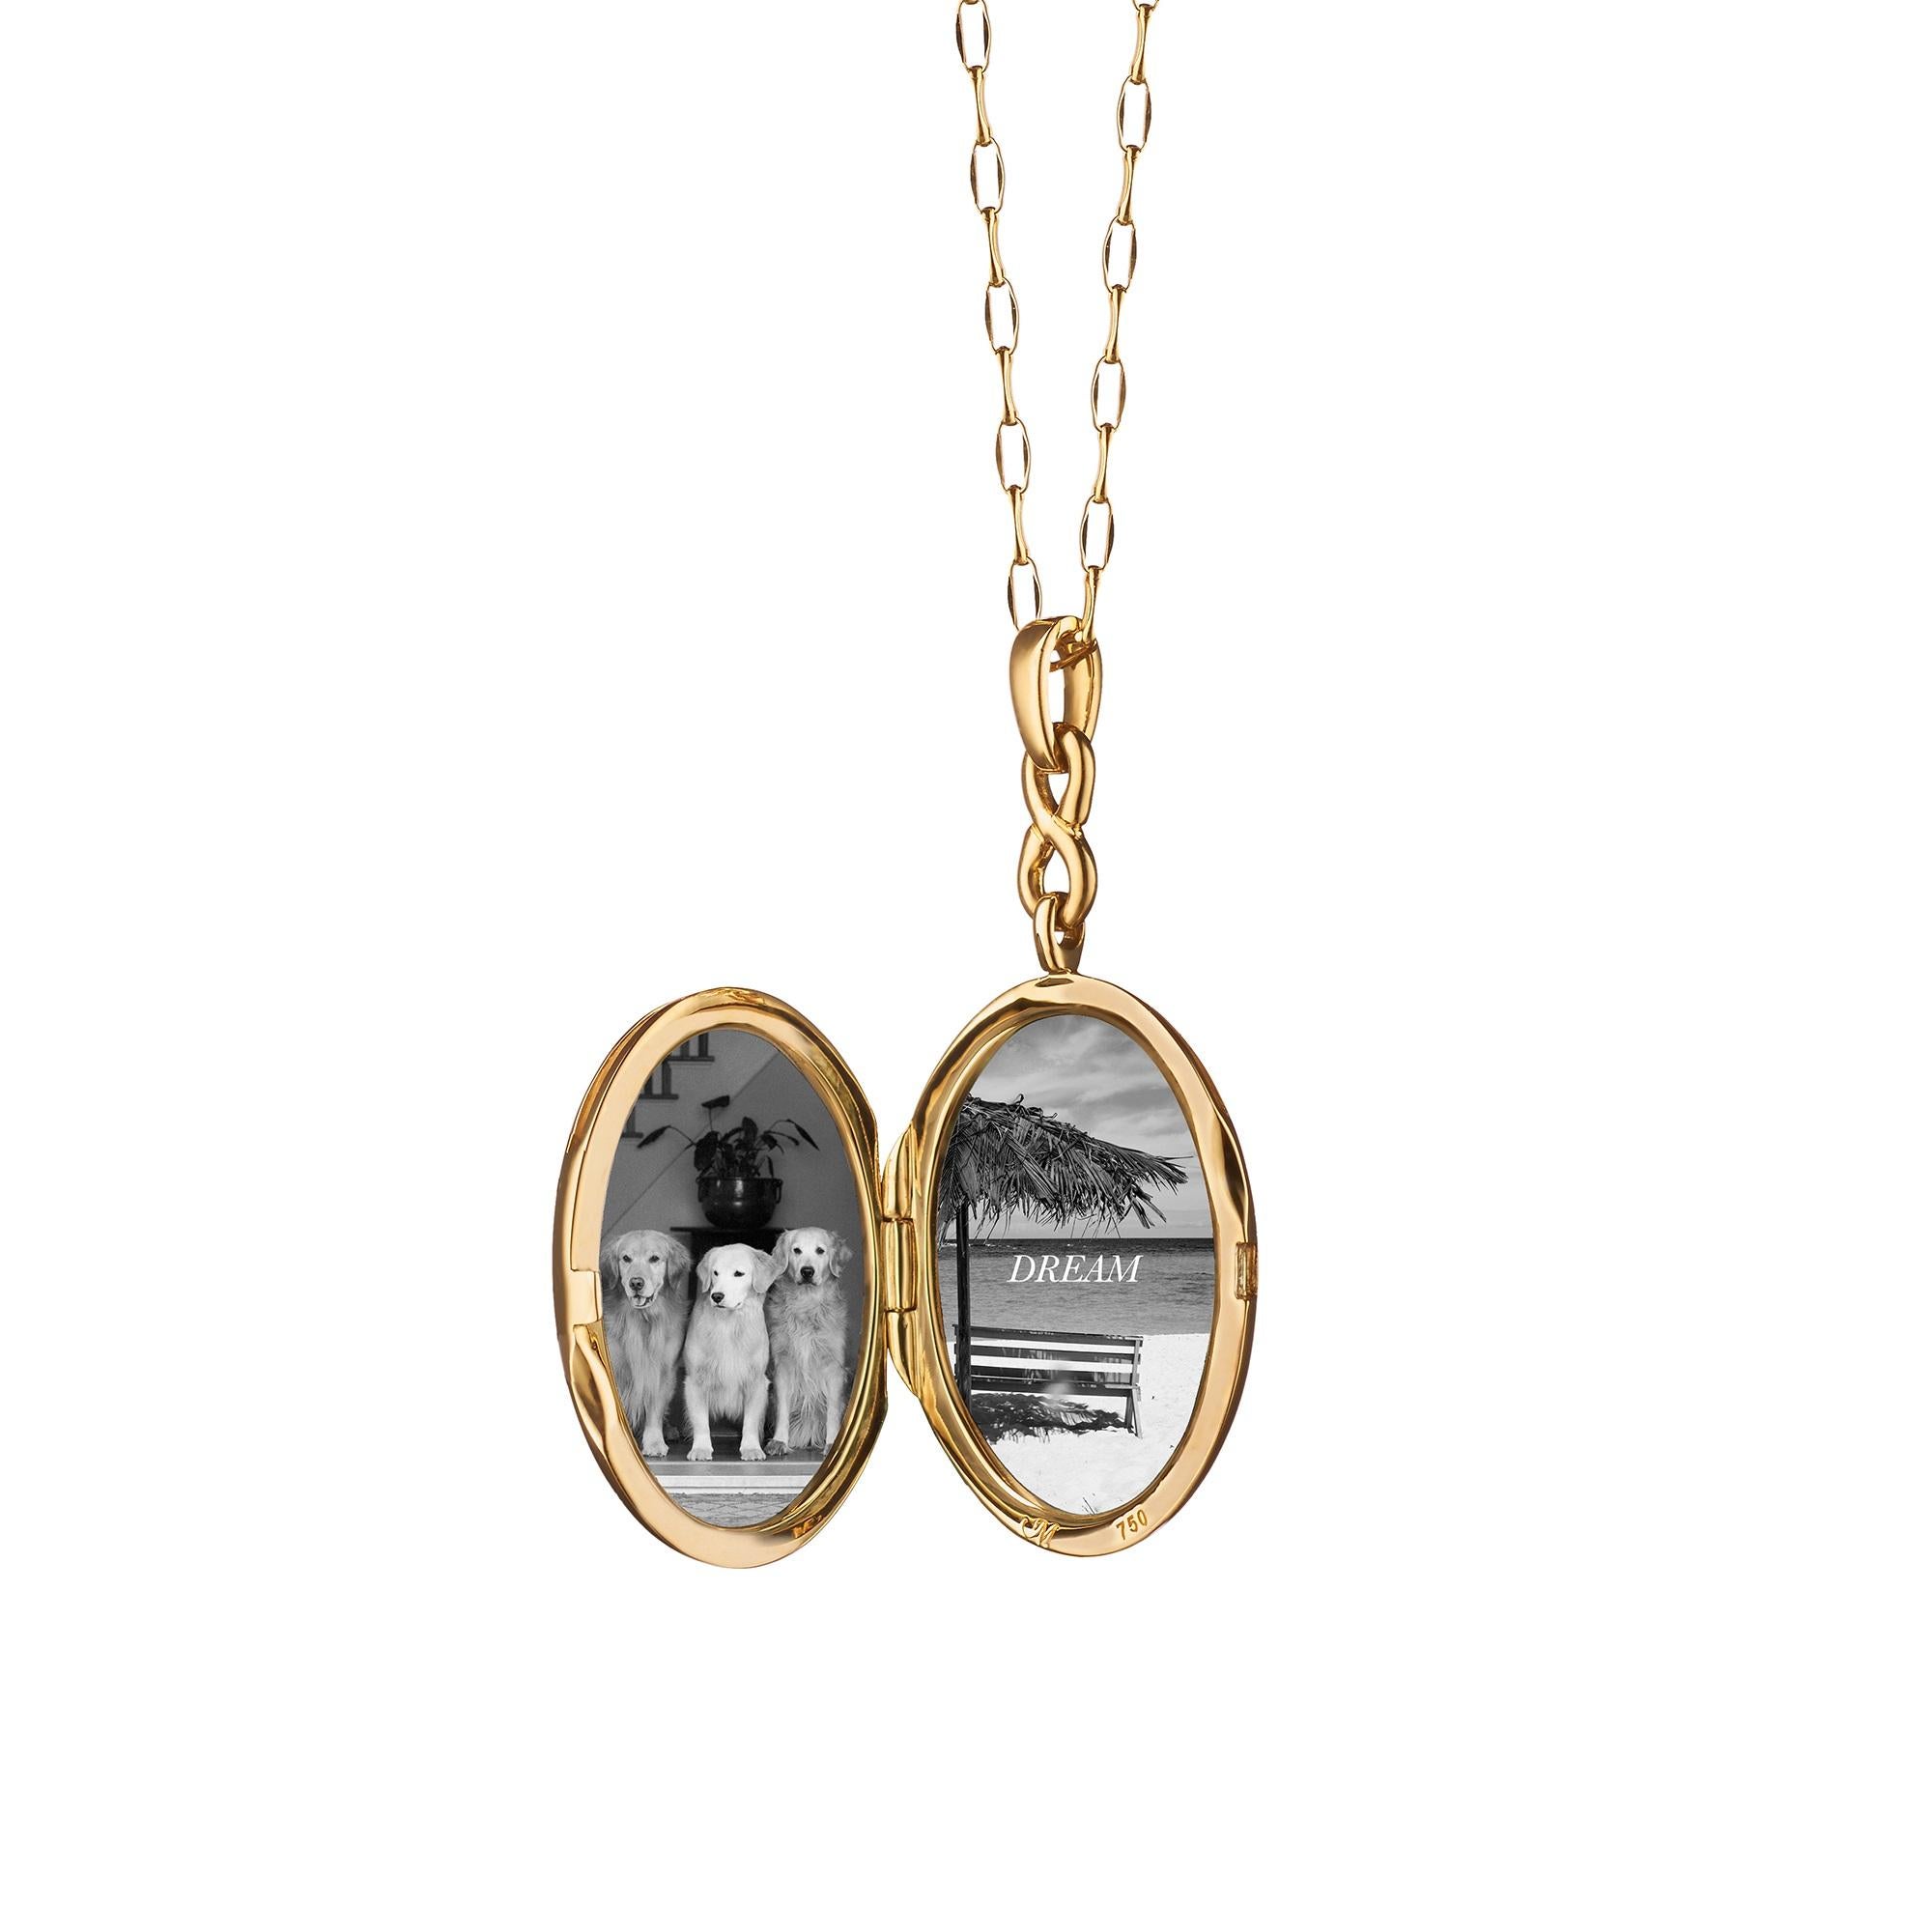 Our Infinity locket is the ultimate everyday piece for the contemporary woman. This 18K yellow gold locket has an infinity design bail with a center rose-cut diamond and is presented on a 30